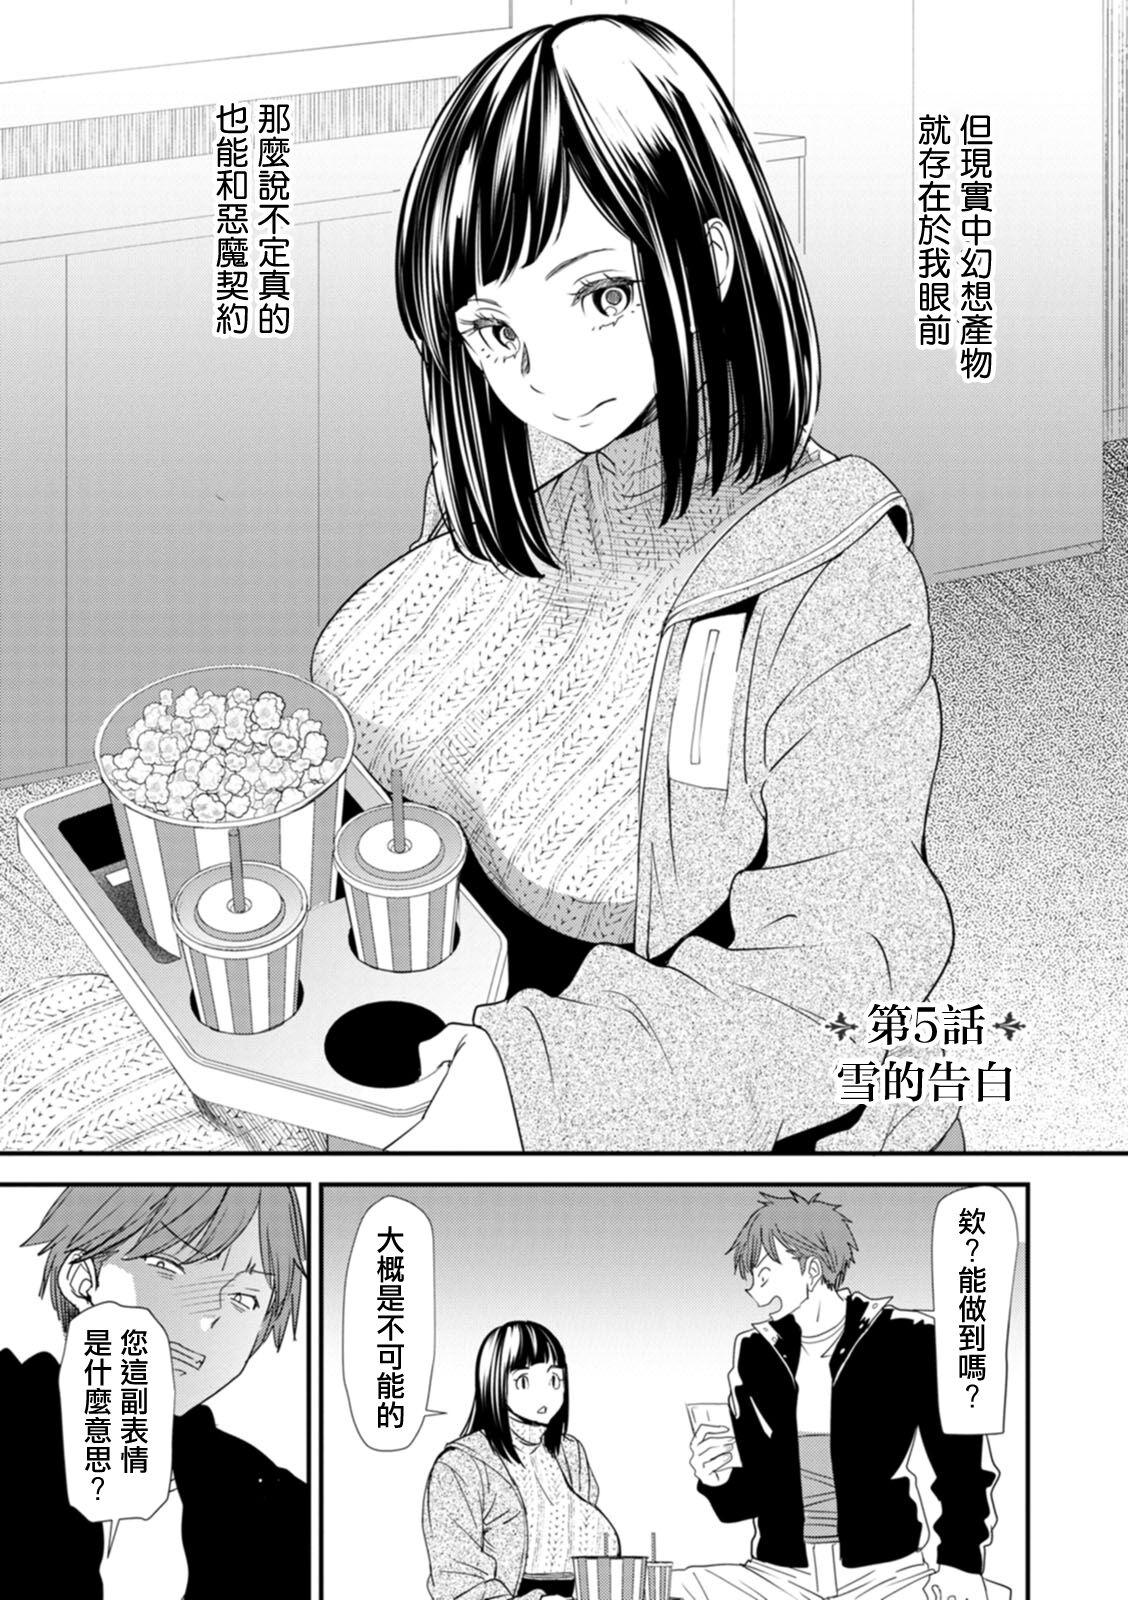 Inma Joshi Daisei no Yuuutsu - The Melancholy of the Succubus who is a college student Ch. 5 2